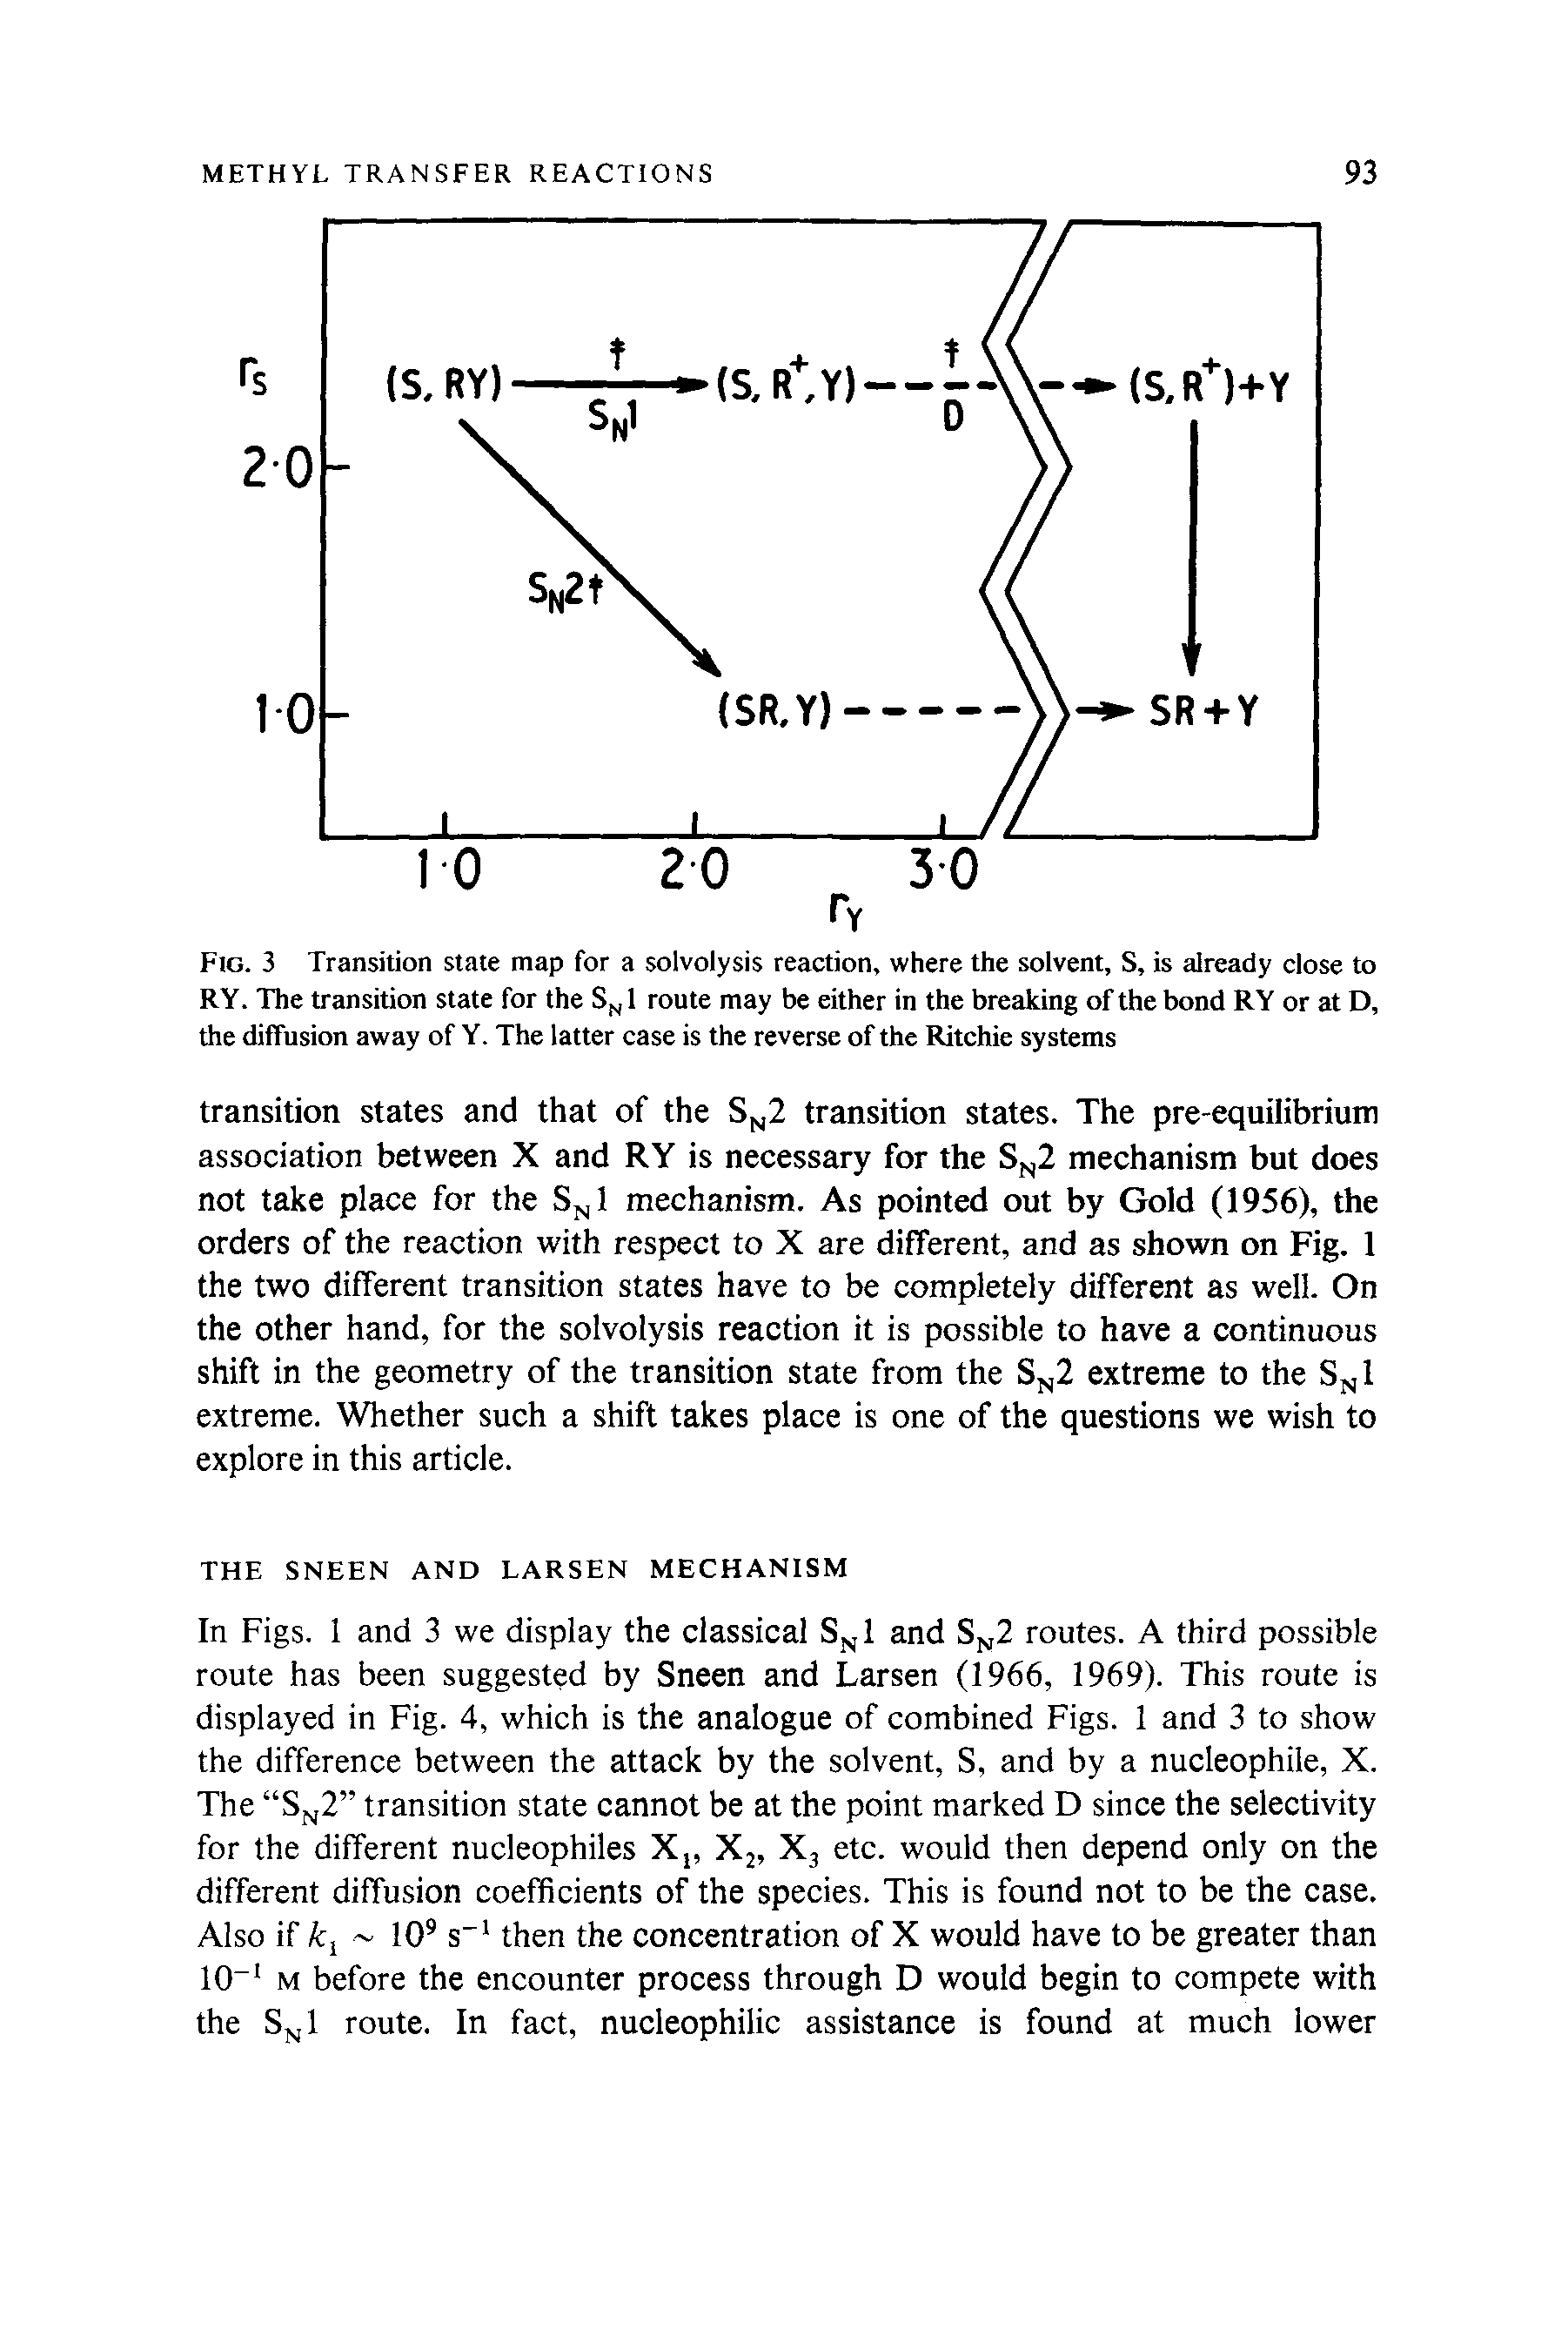 Fig. 3 Transition state map for a solvolysis reaction, where the solvent, S, is already close to RY. The transition state for the SN1 route may be either in the breaking of the bond RY or at D, the diffusion away of Y. The latter case is the reverse of the Ritchie systems...